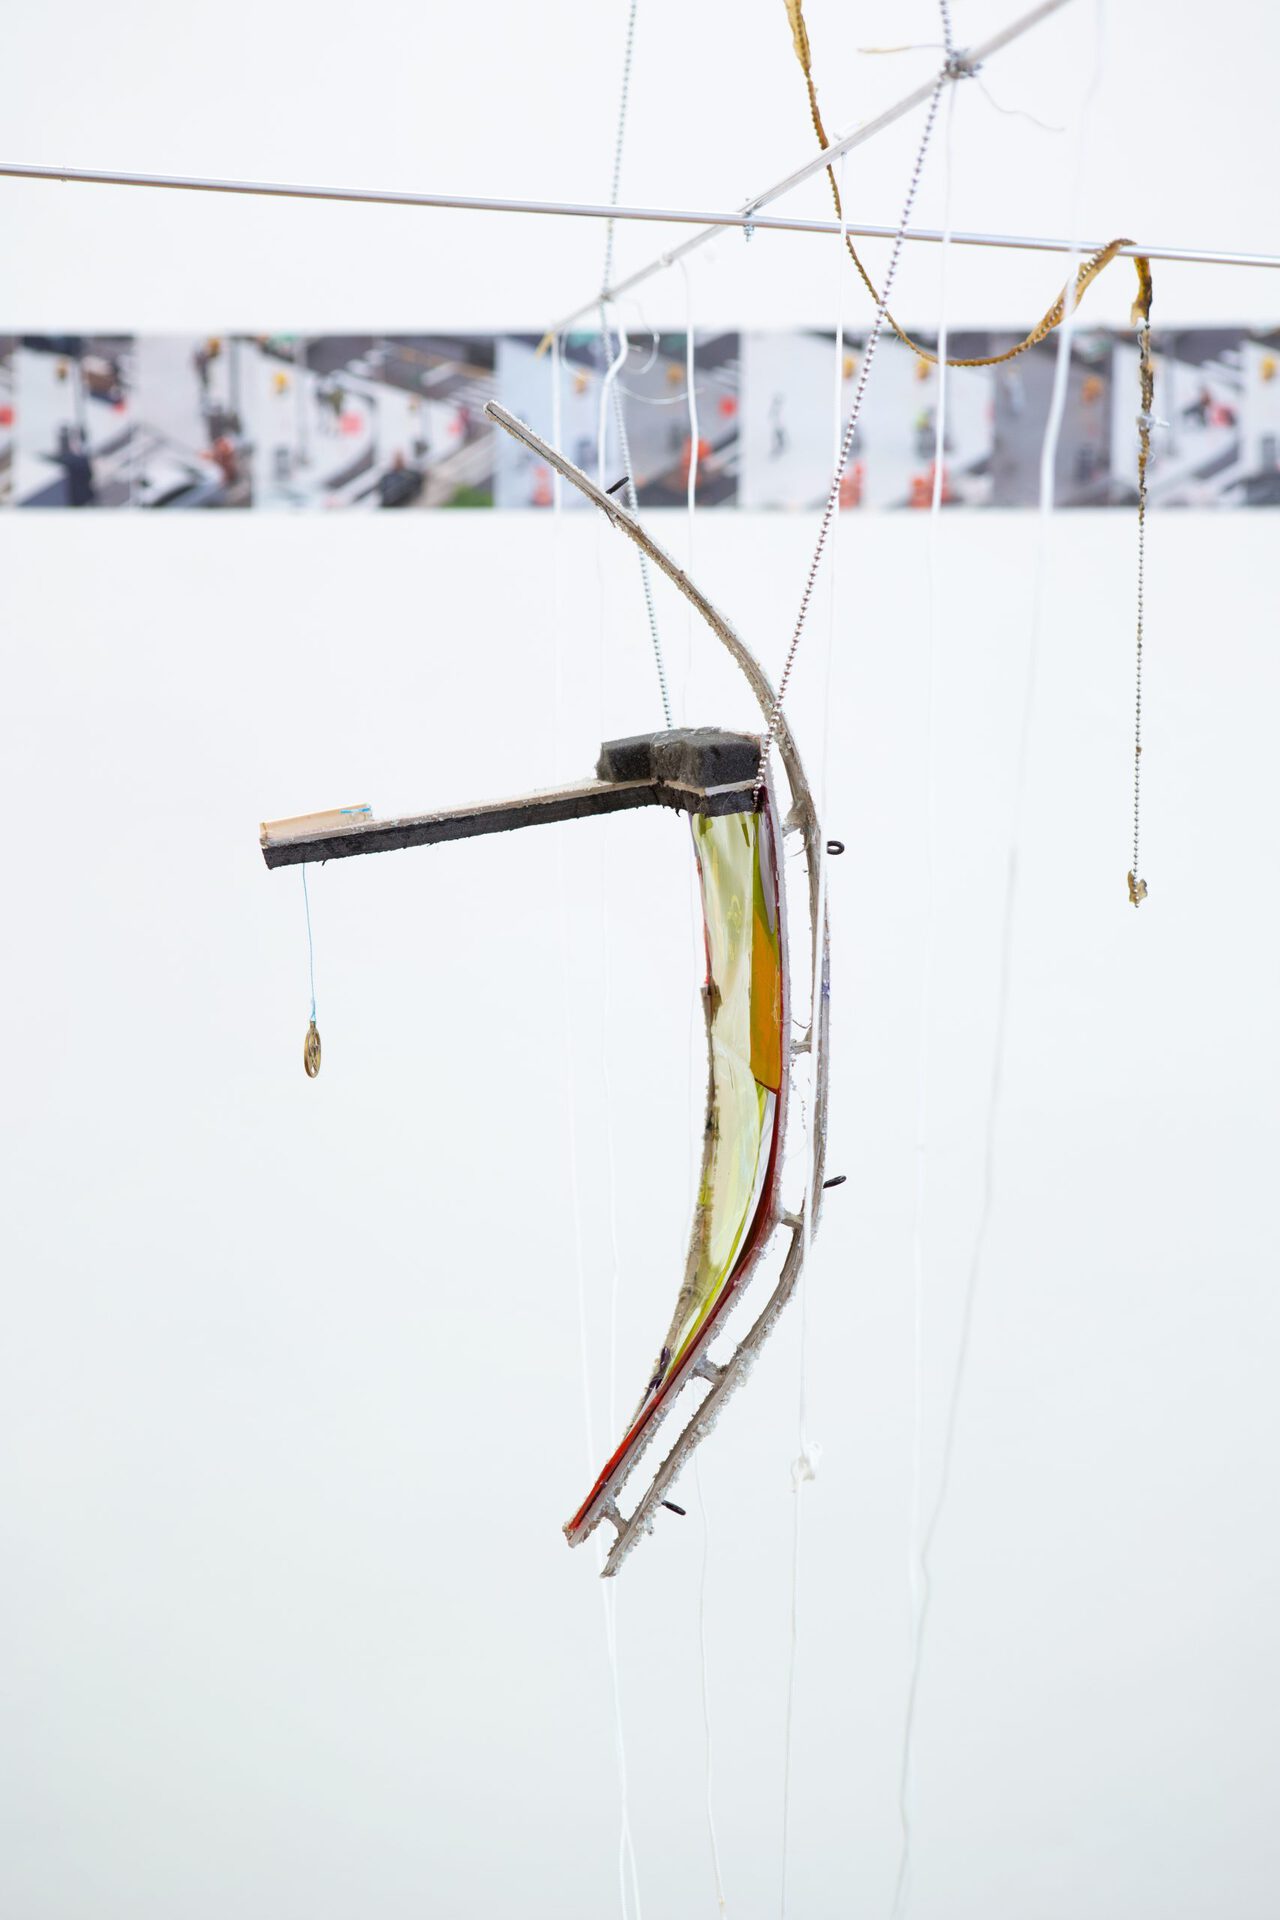 Anders Dickson, pocket of solace and suspension of belief, 2020, Bronze, chain, latex, wire, rope, cardboard, gravel, glue, foam, photo, mylar, dimensions variable